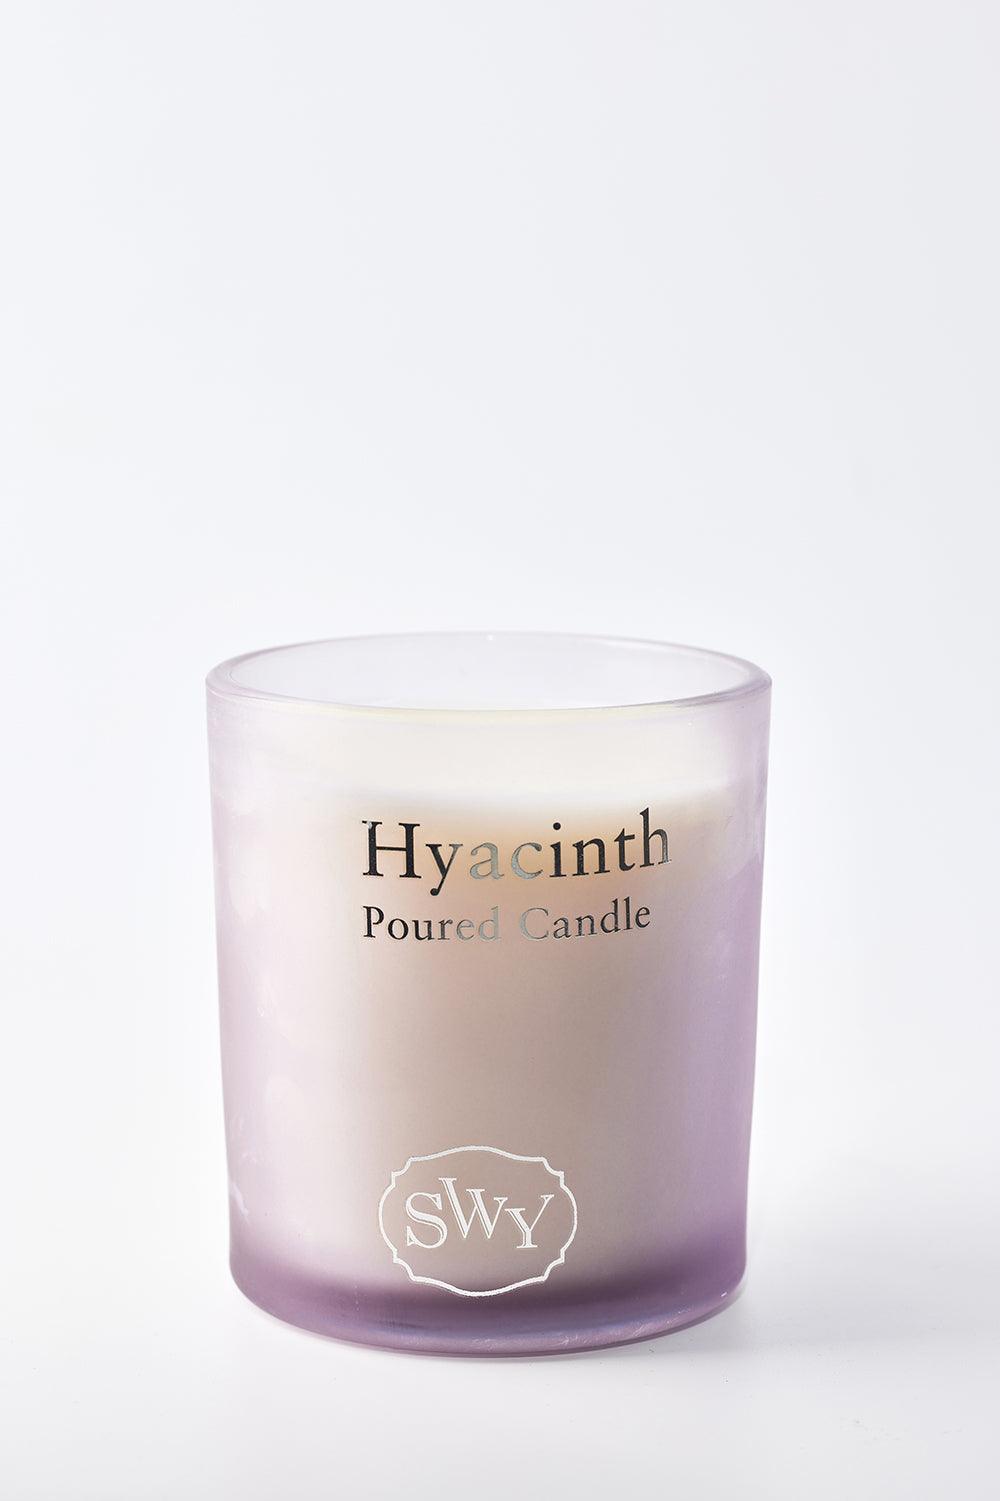 Poured Candle – Hyacinth - SWY - Scent With You